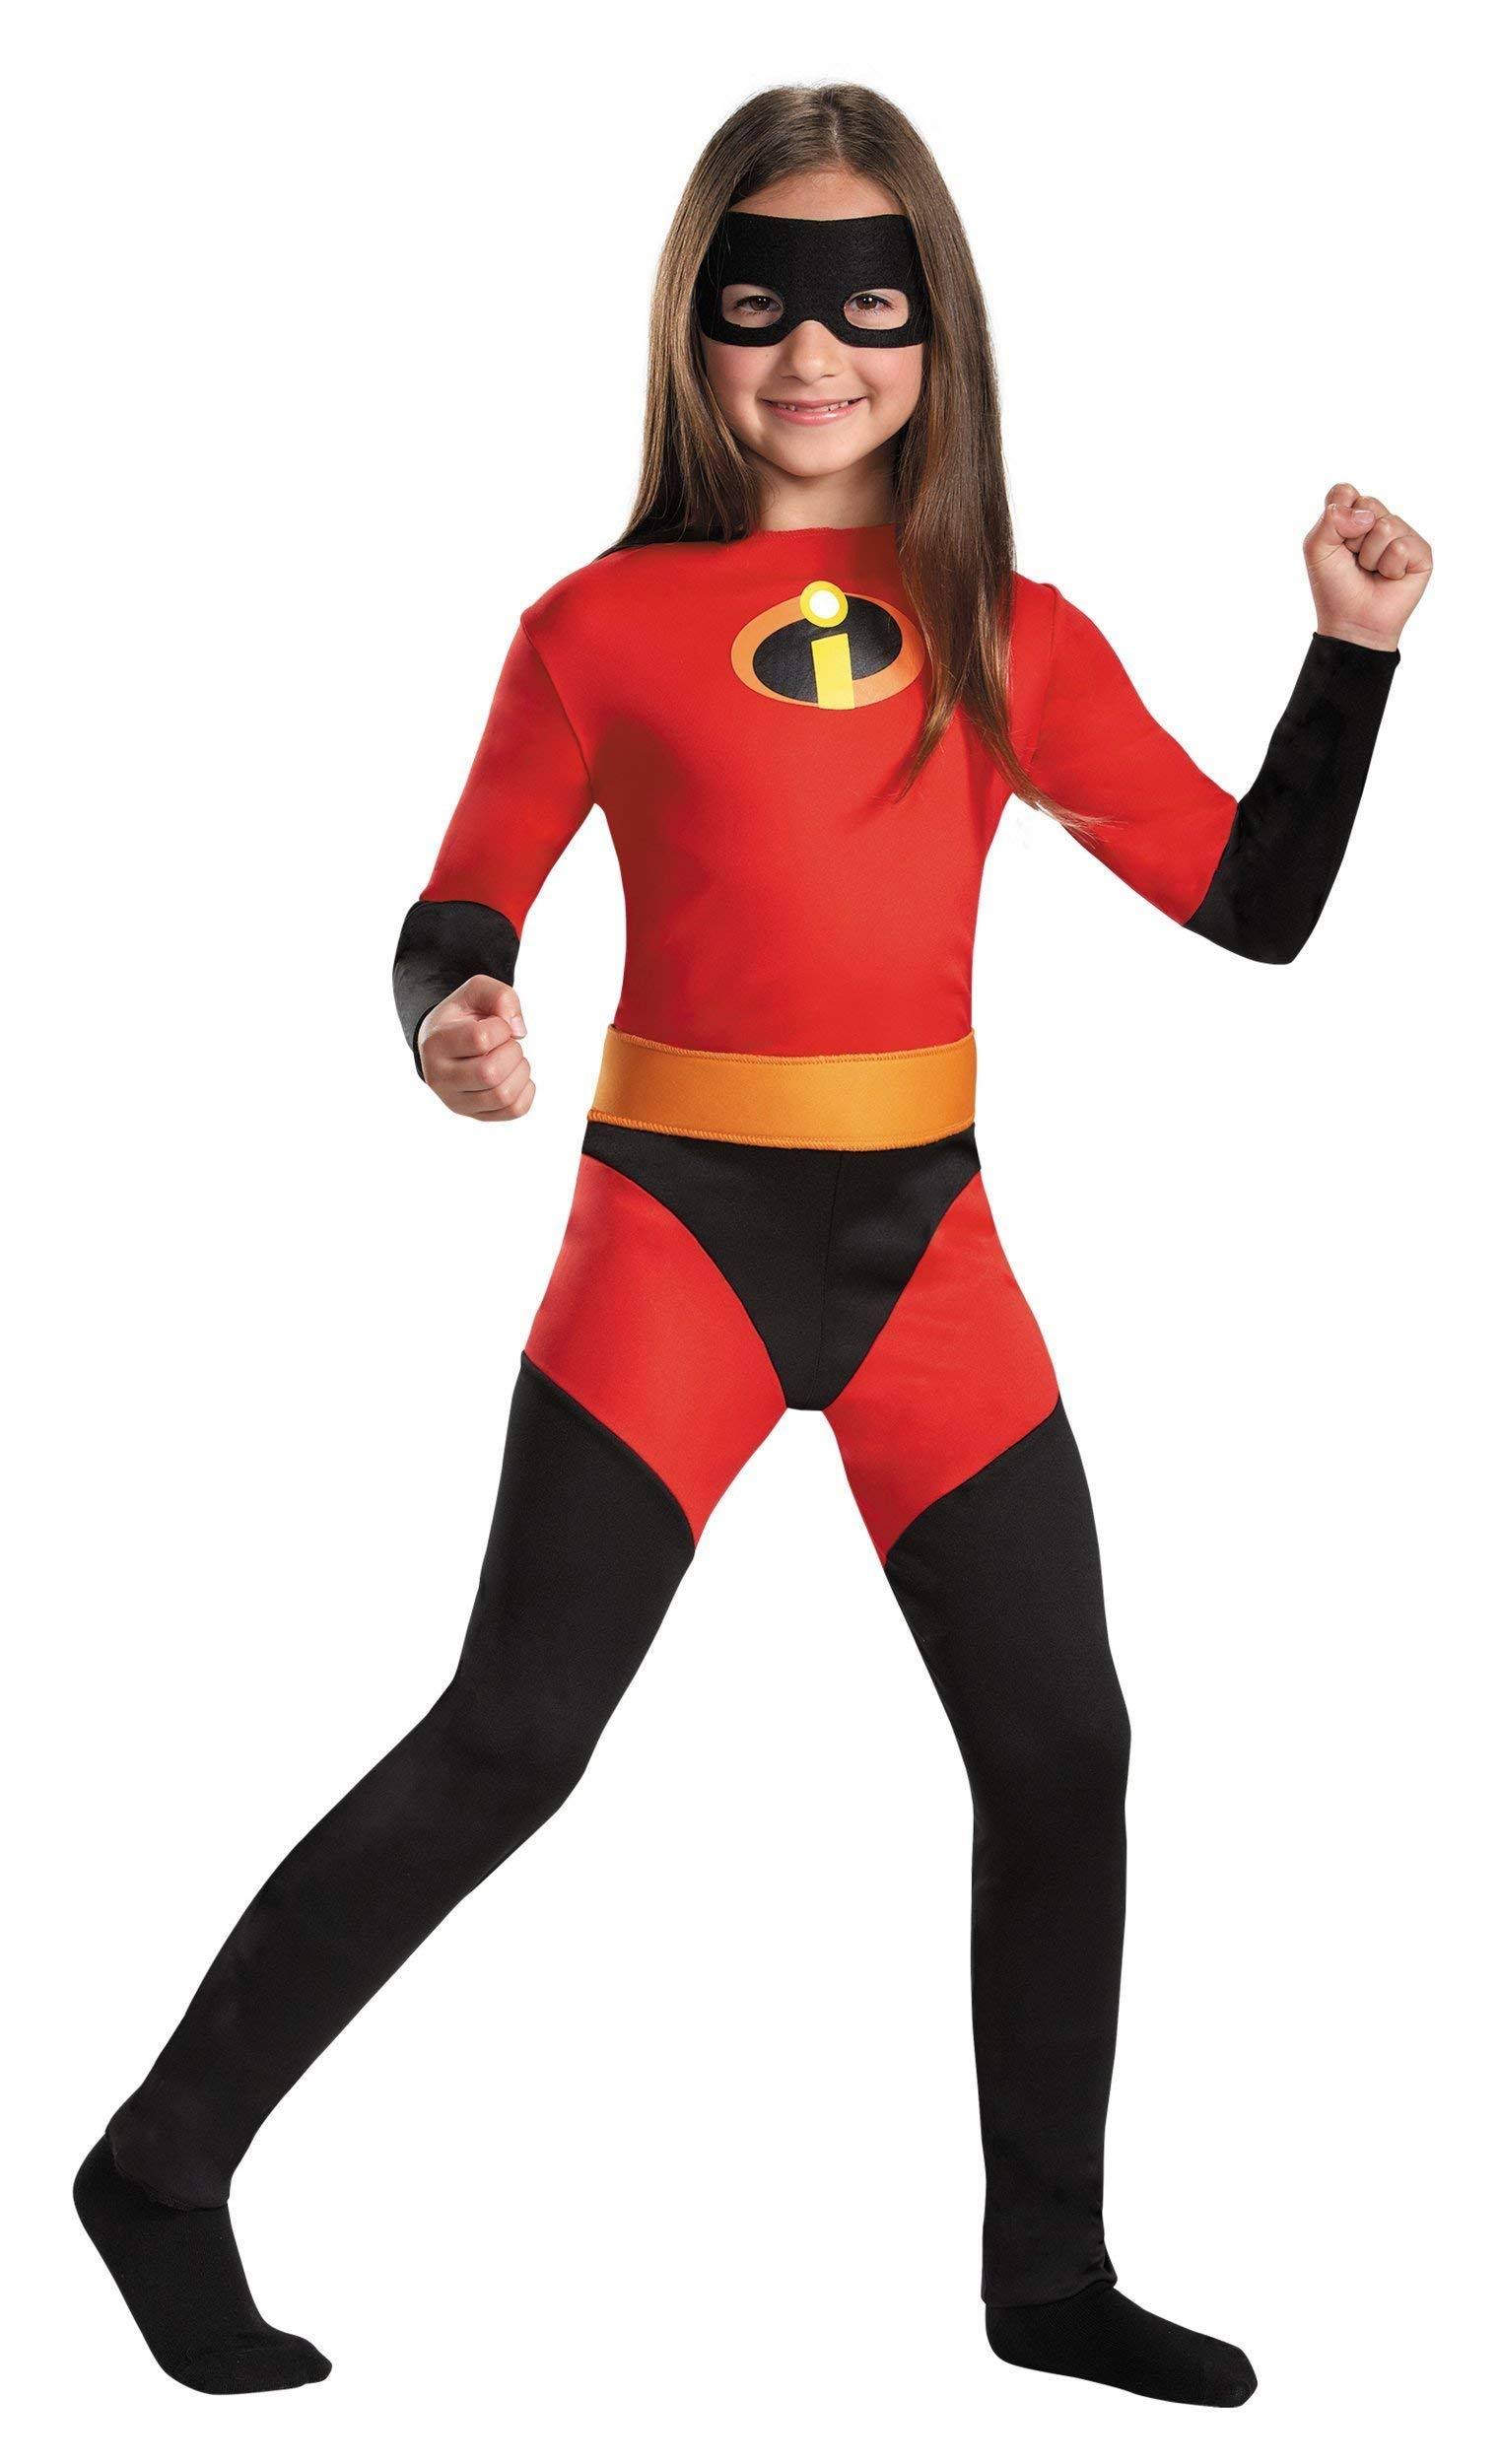 Disguise Disney The Incredibles Classic Girls Costume - Violet , Medium 7-8